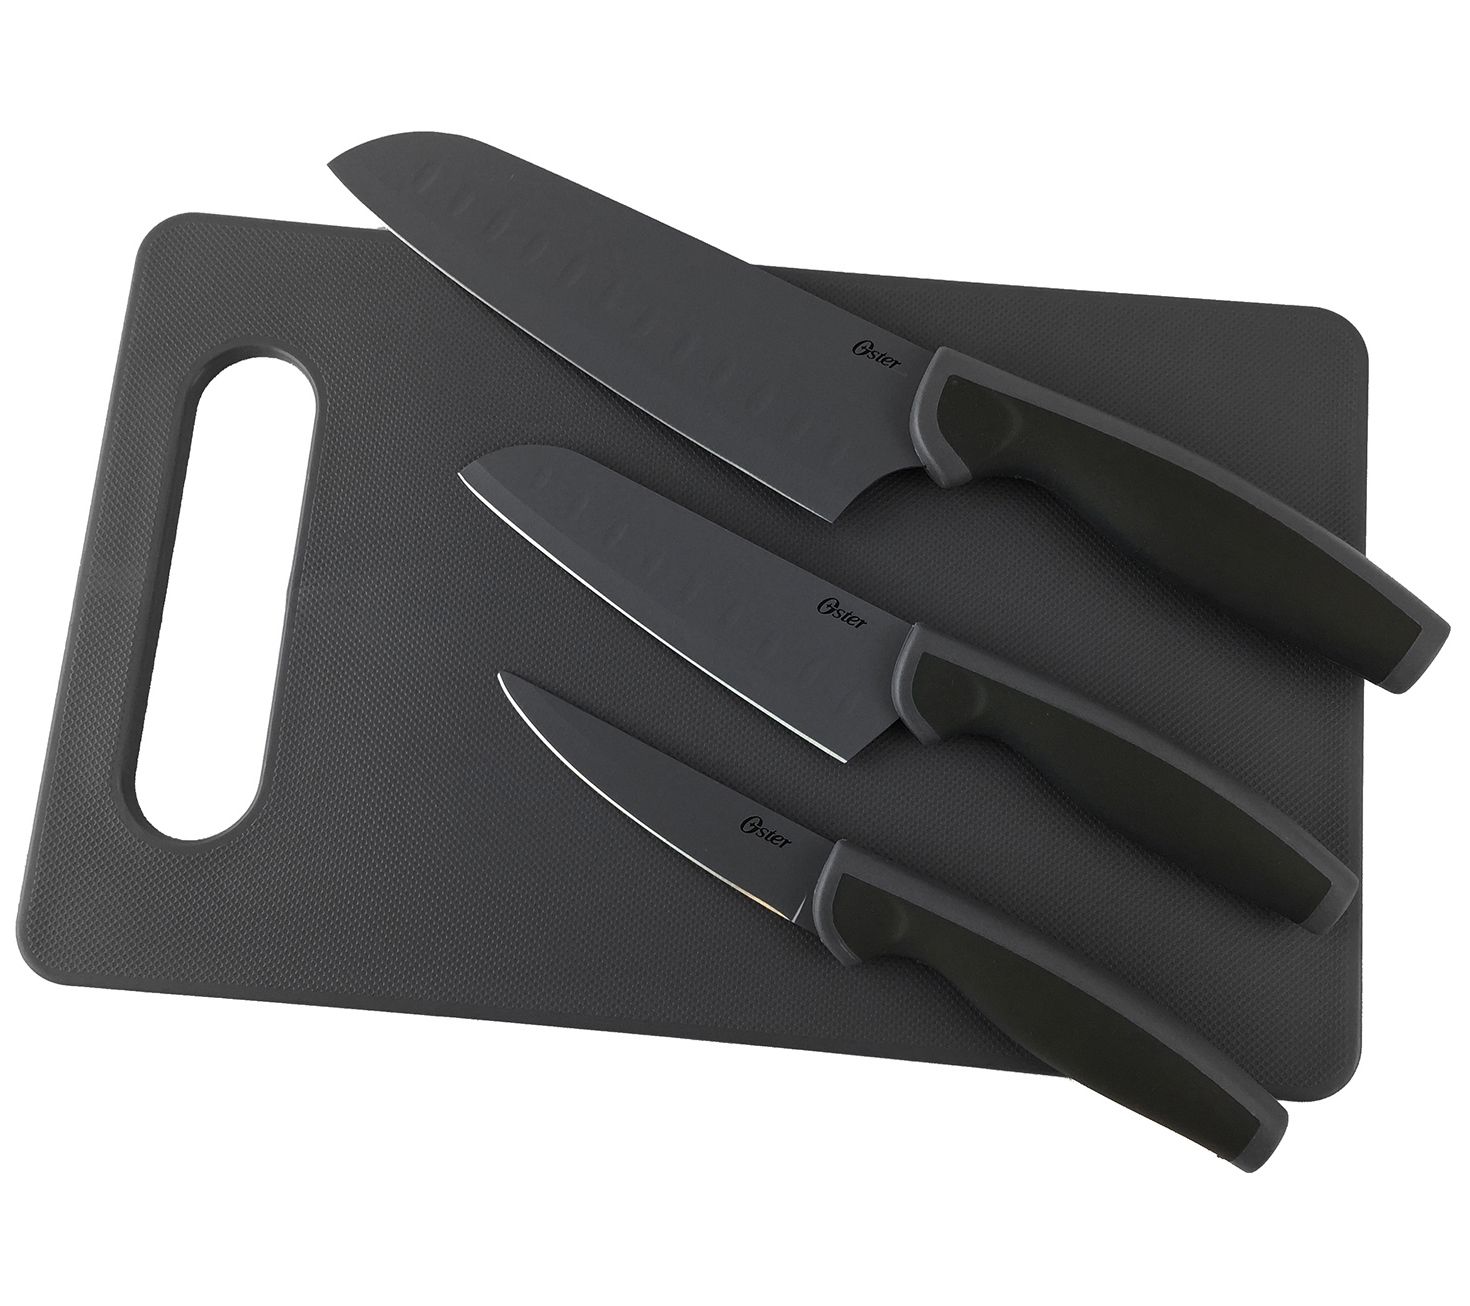 Tuo Cutlery Legacy 6 Piece Luxury Knife Block Set - Blade HQ